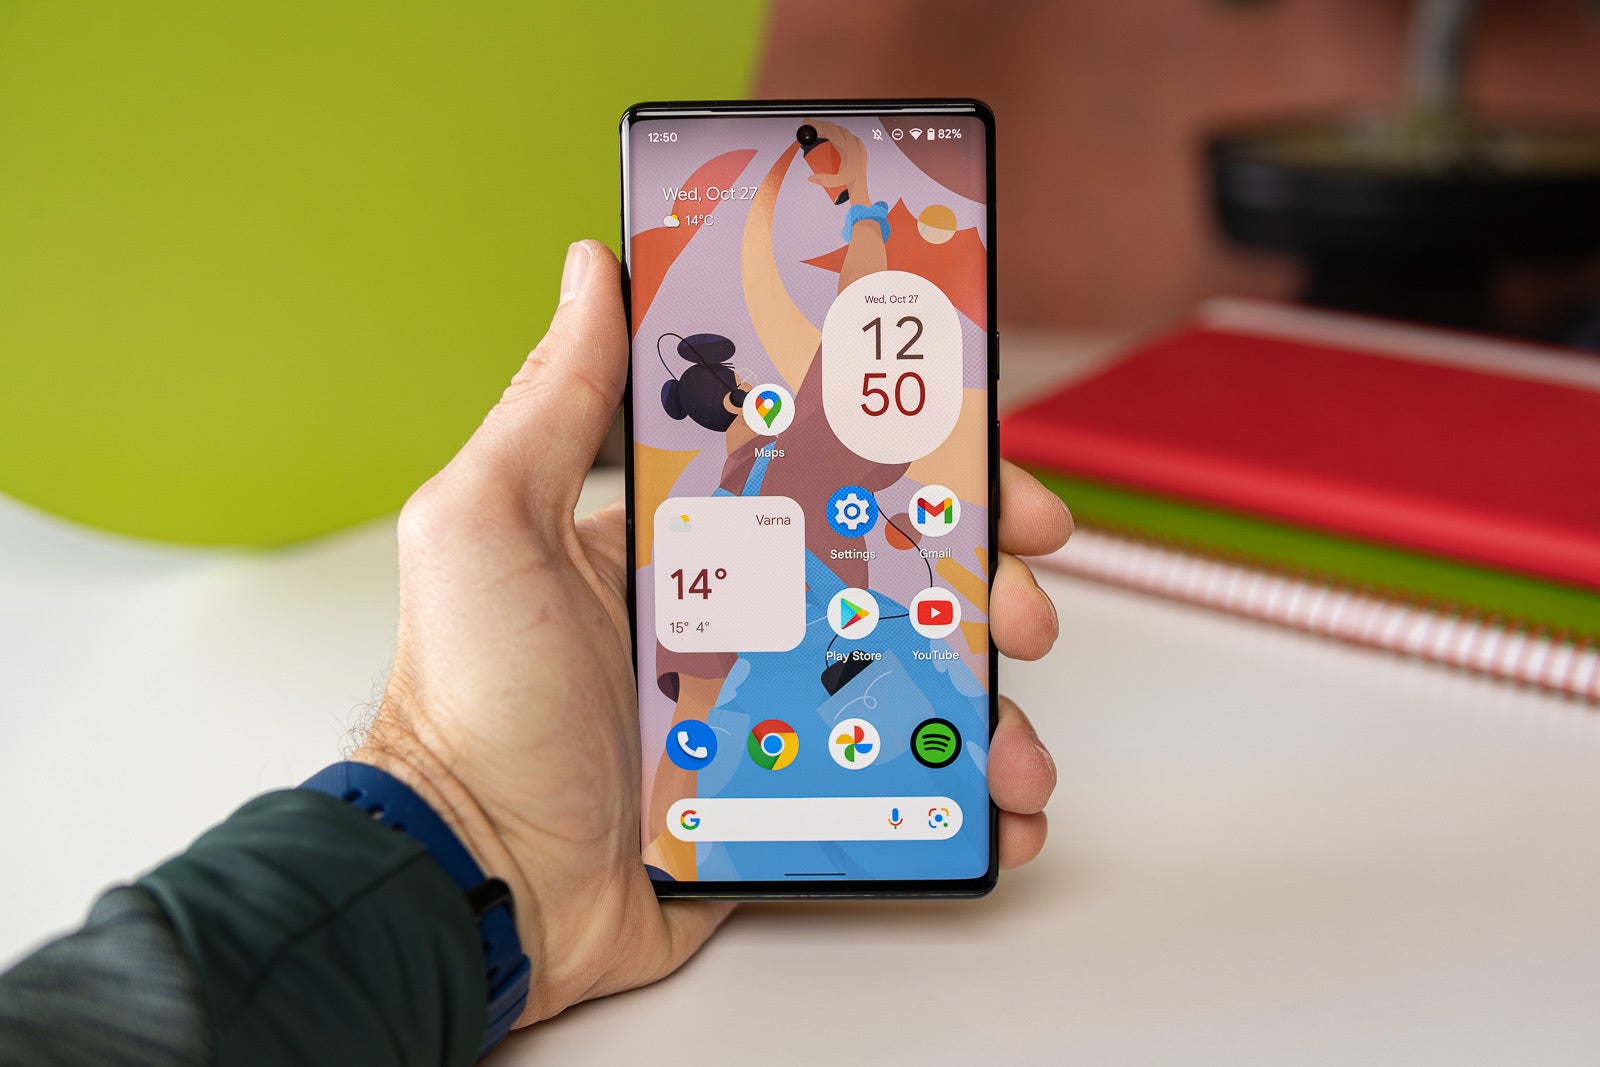 The best AT&T phones to buy - updated May 2022